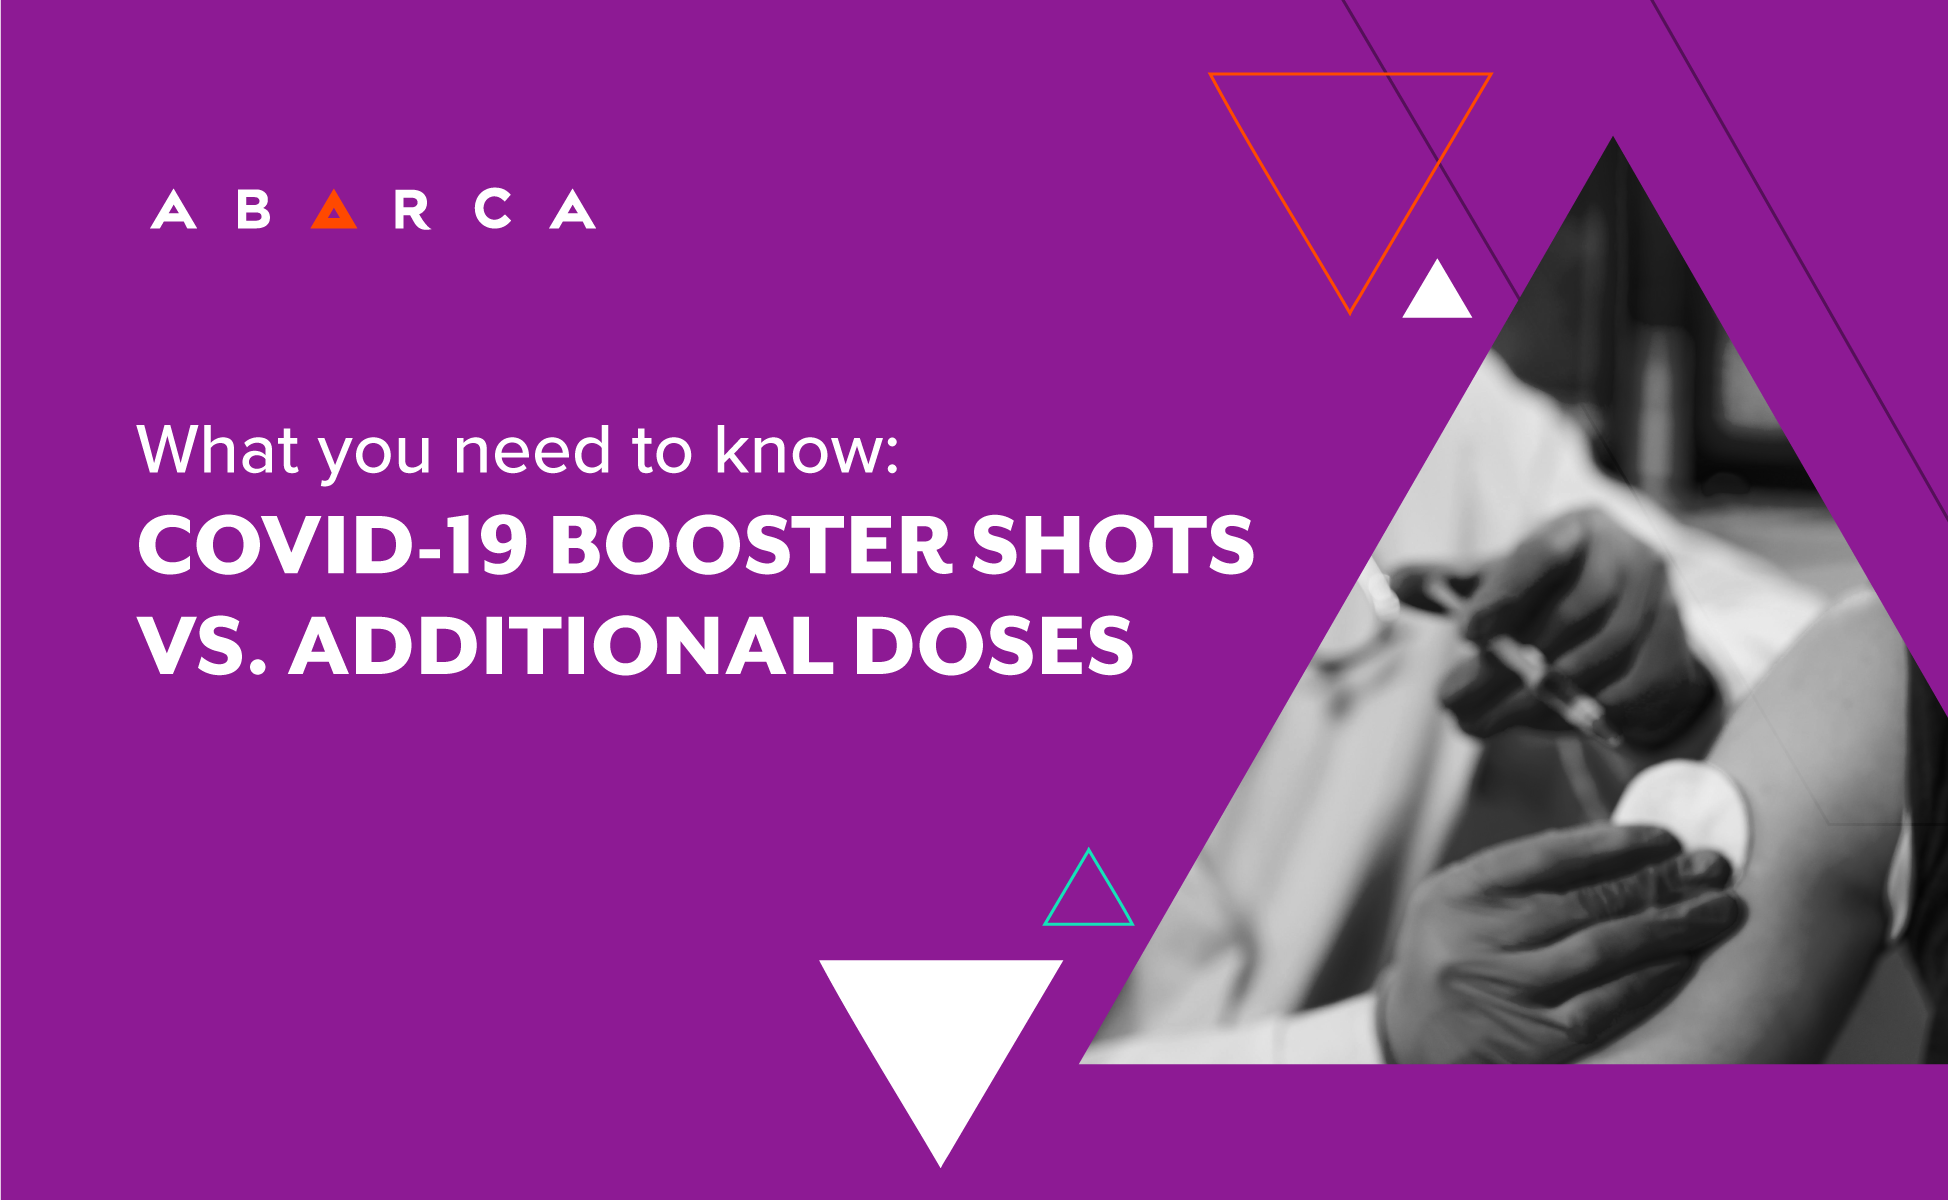 Abarca Health - What you need to know: COVID-19 booster shots versus additional doses